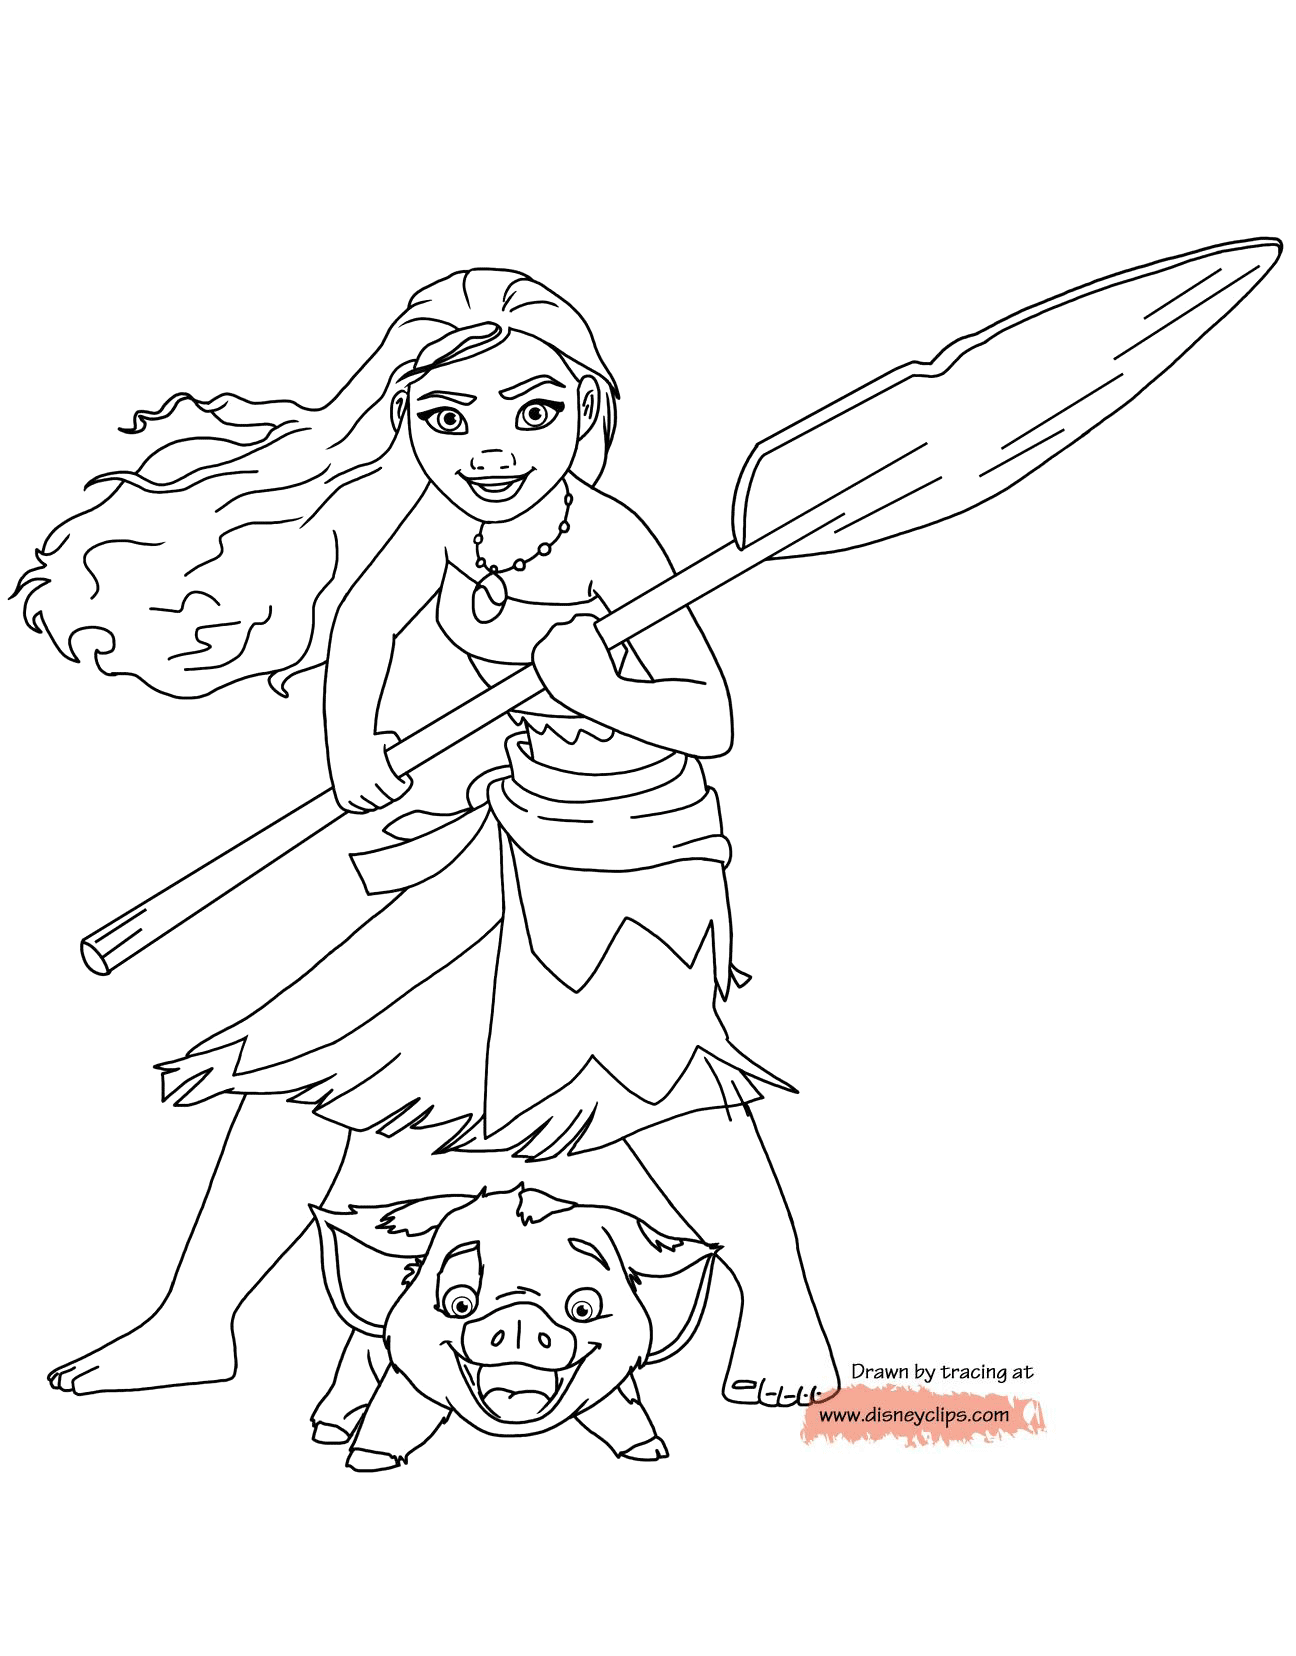 disney-s-moana-printable-coloring-pages-disneyclips